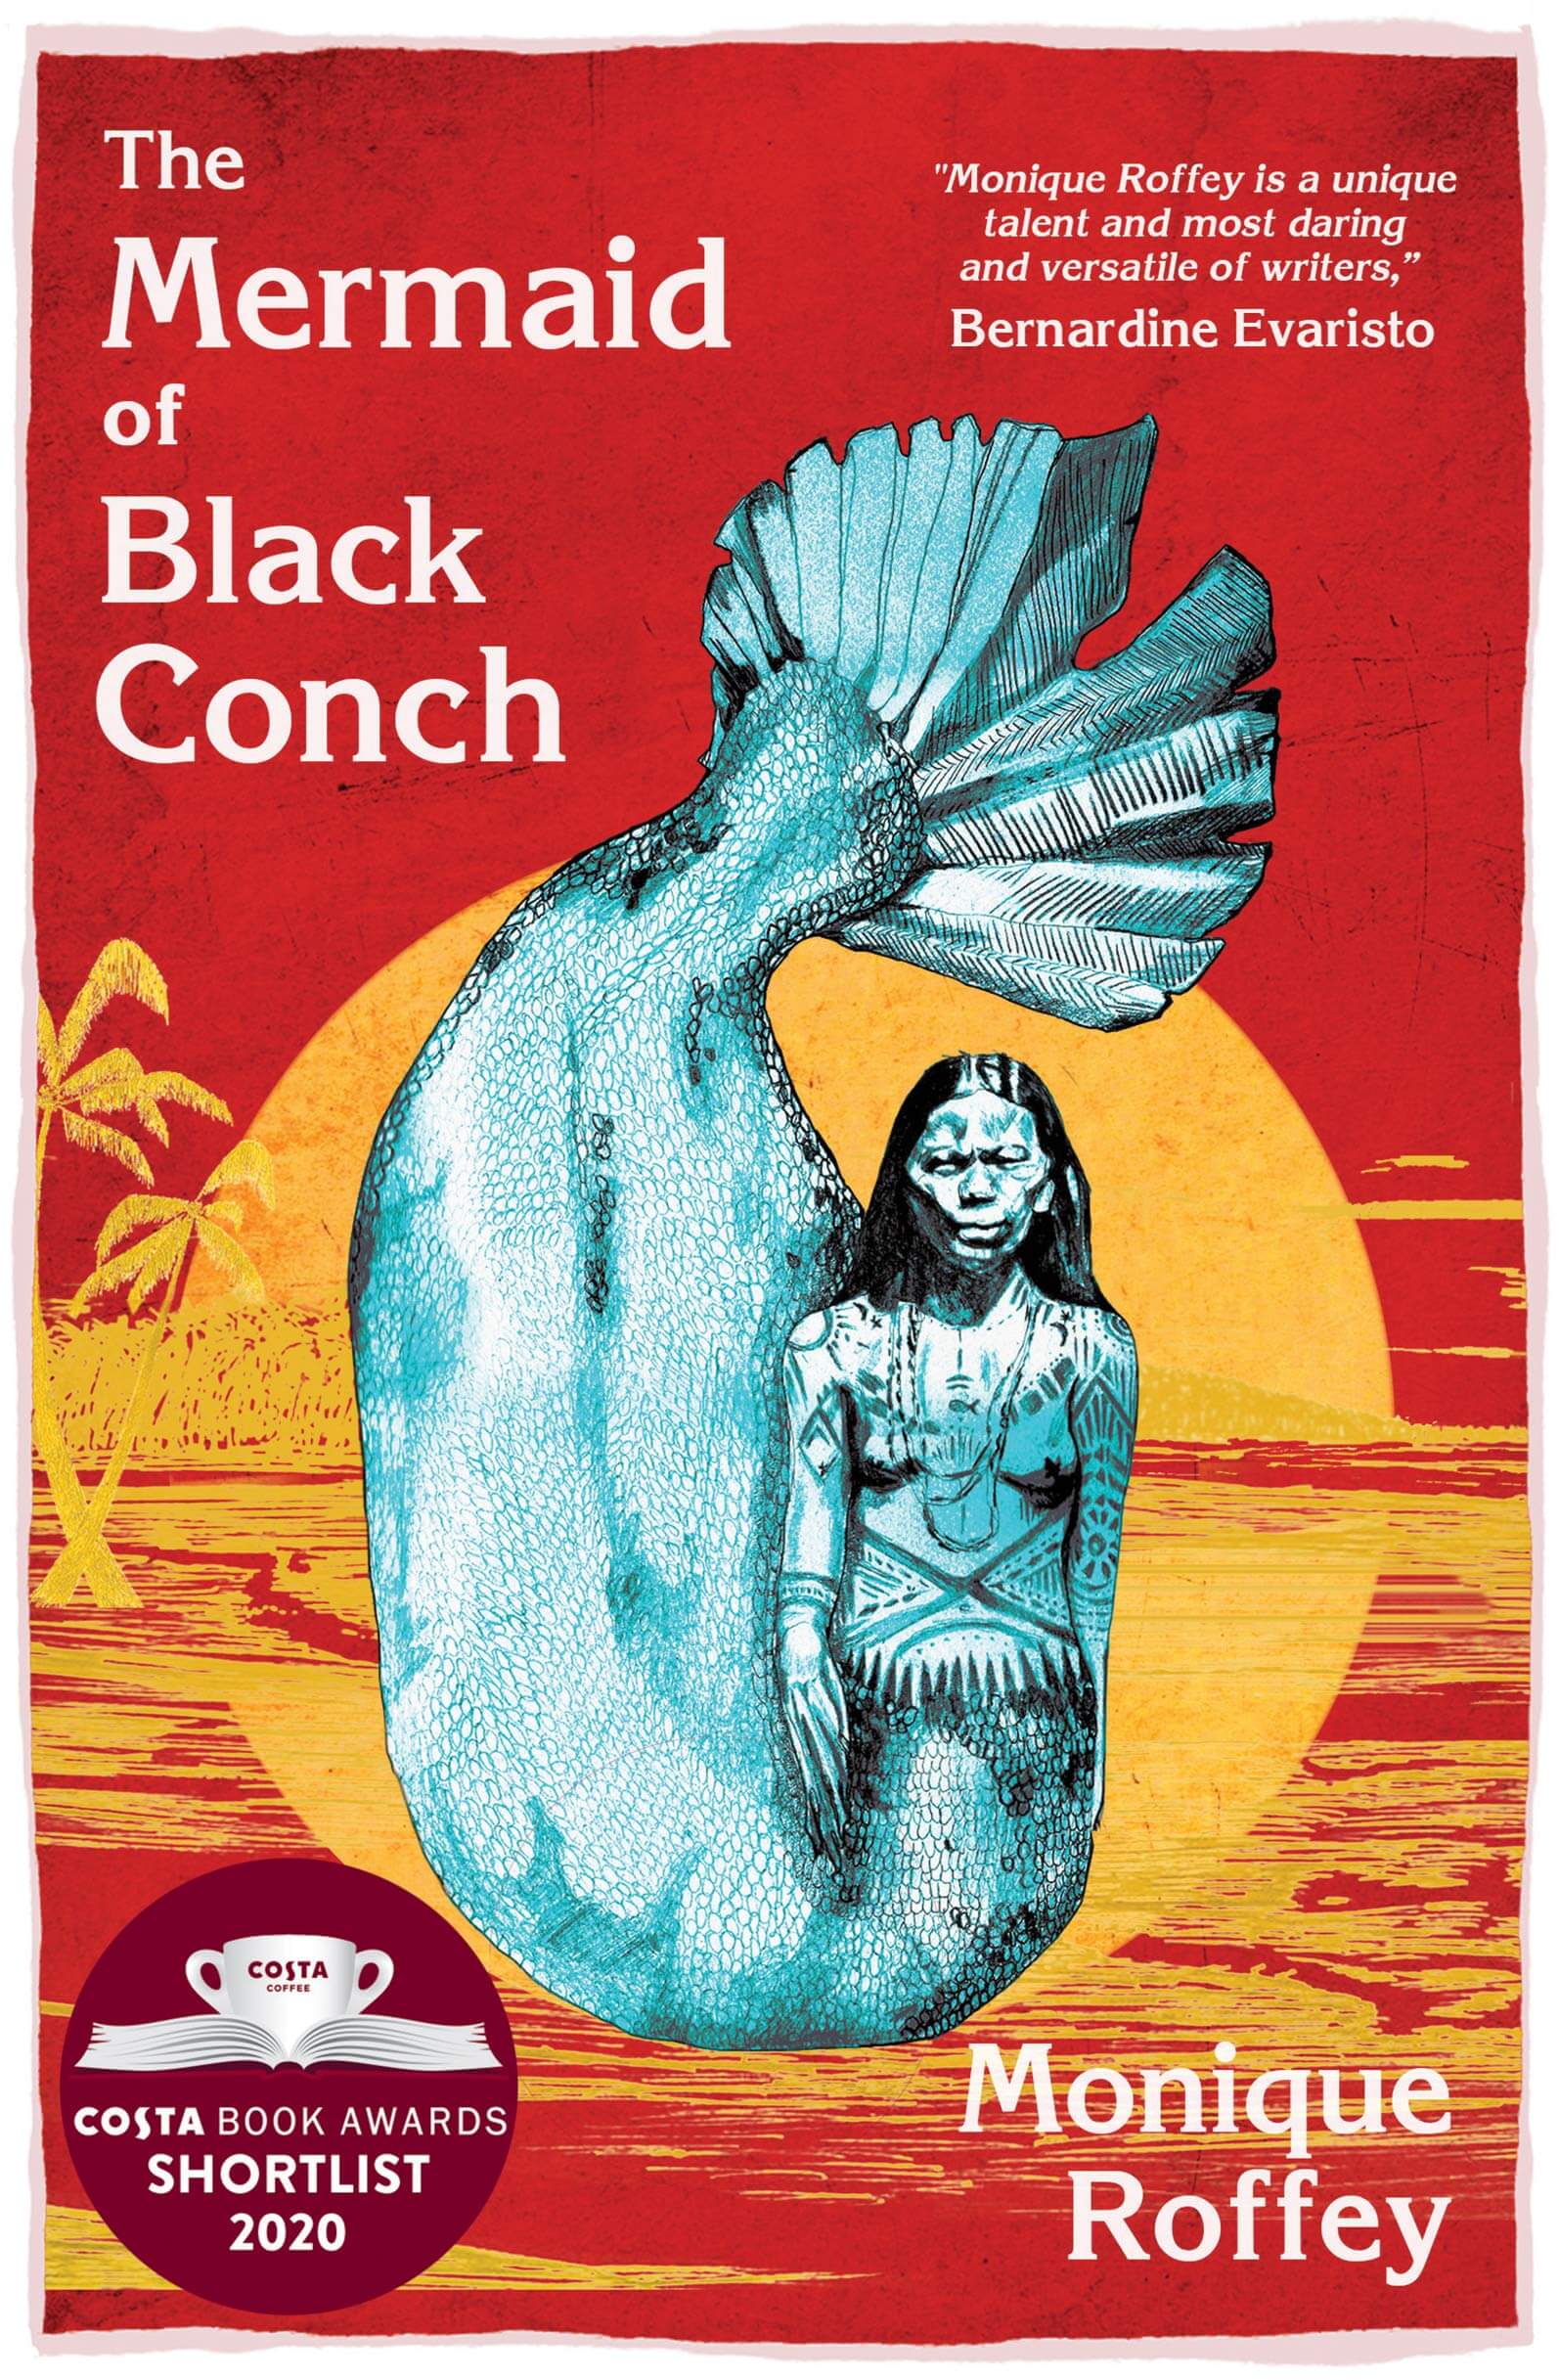 The Mermaid of Black Conch: A Love Story - Monique Roffey | Chiltern